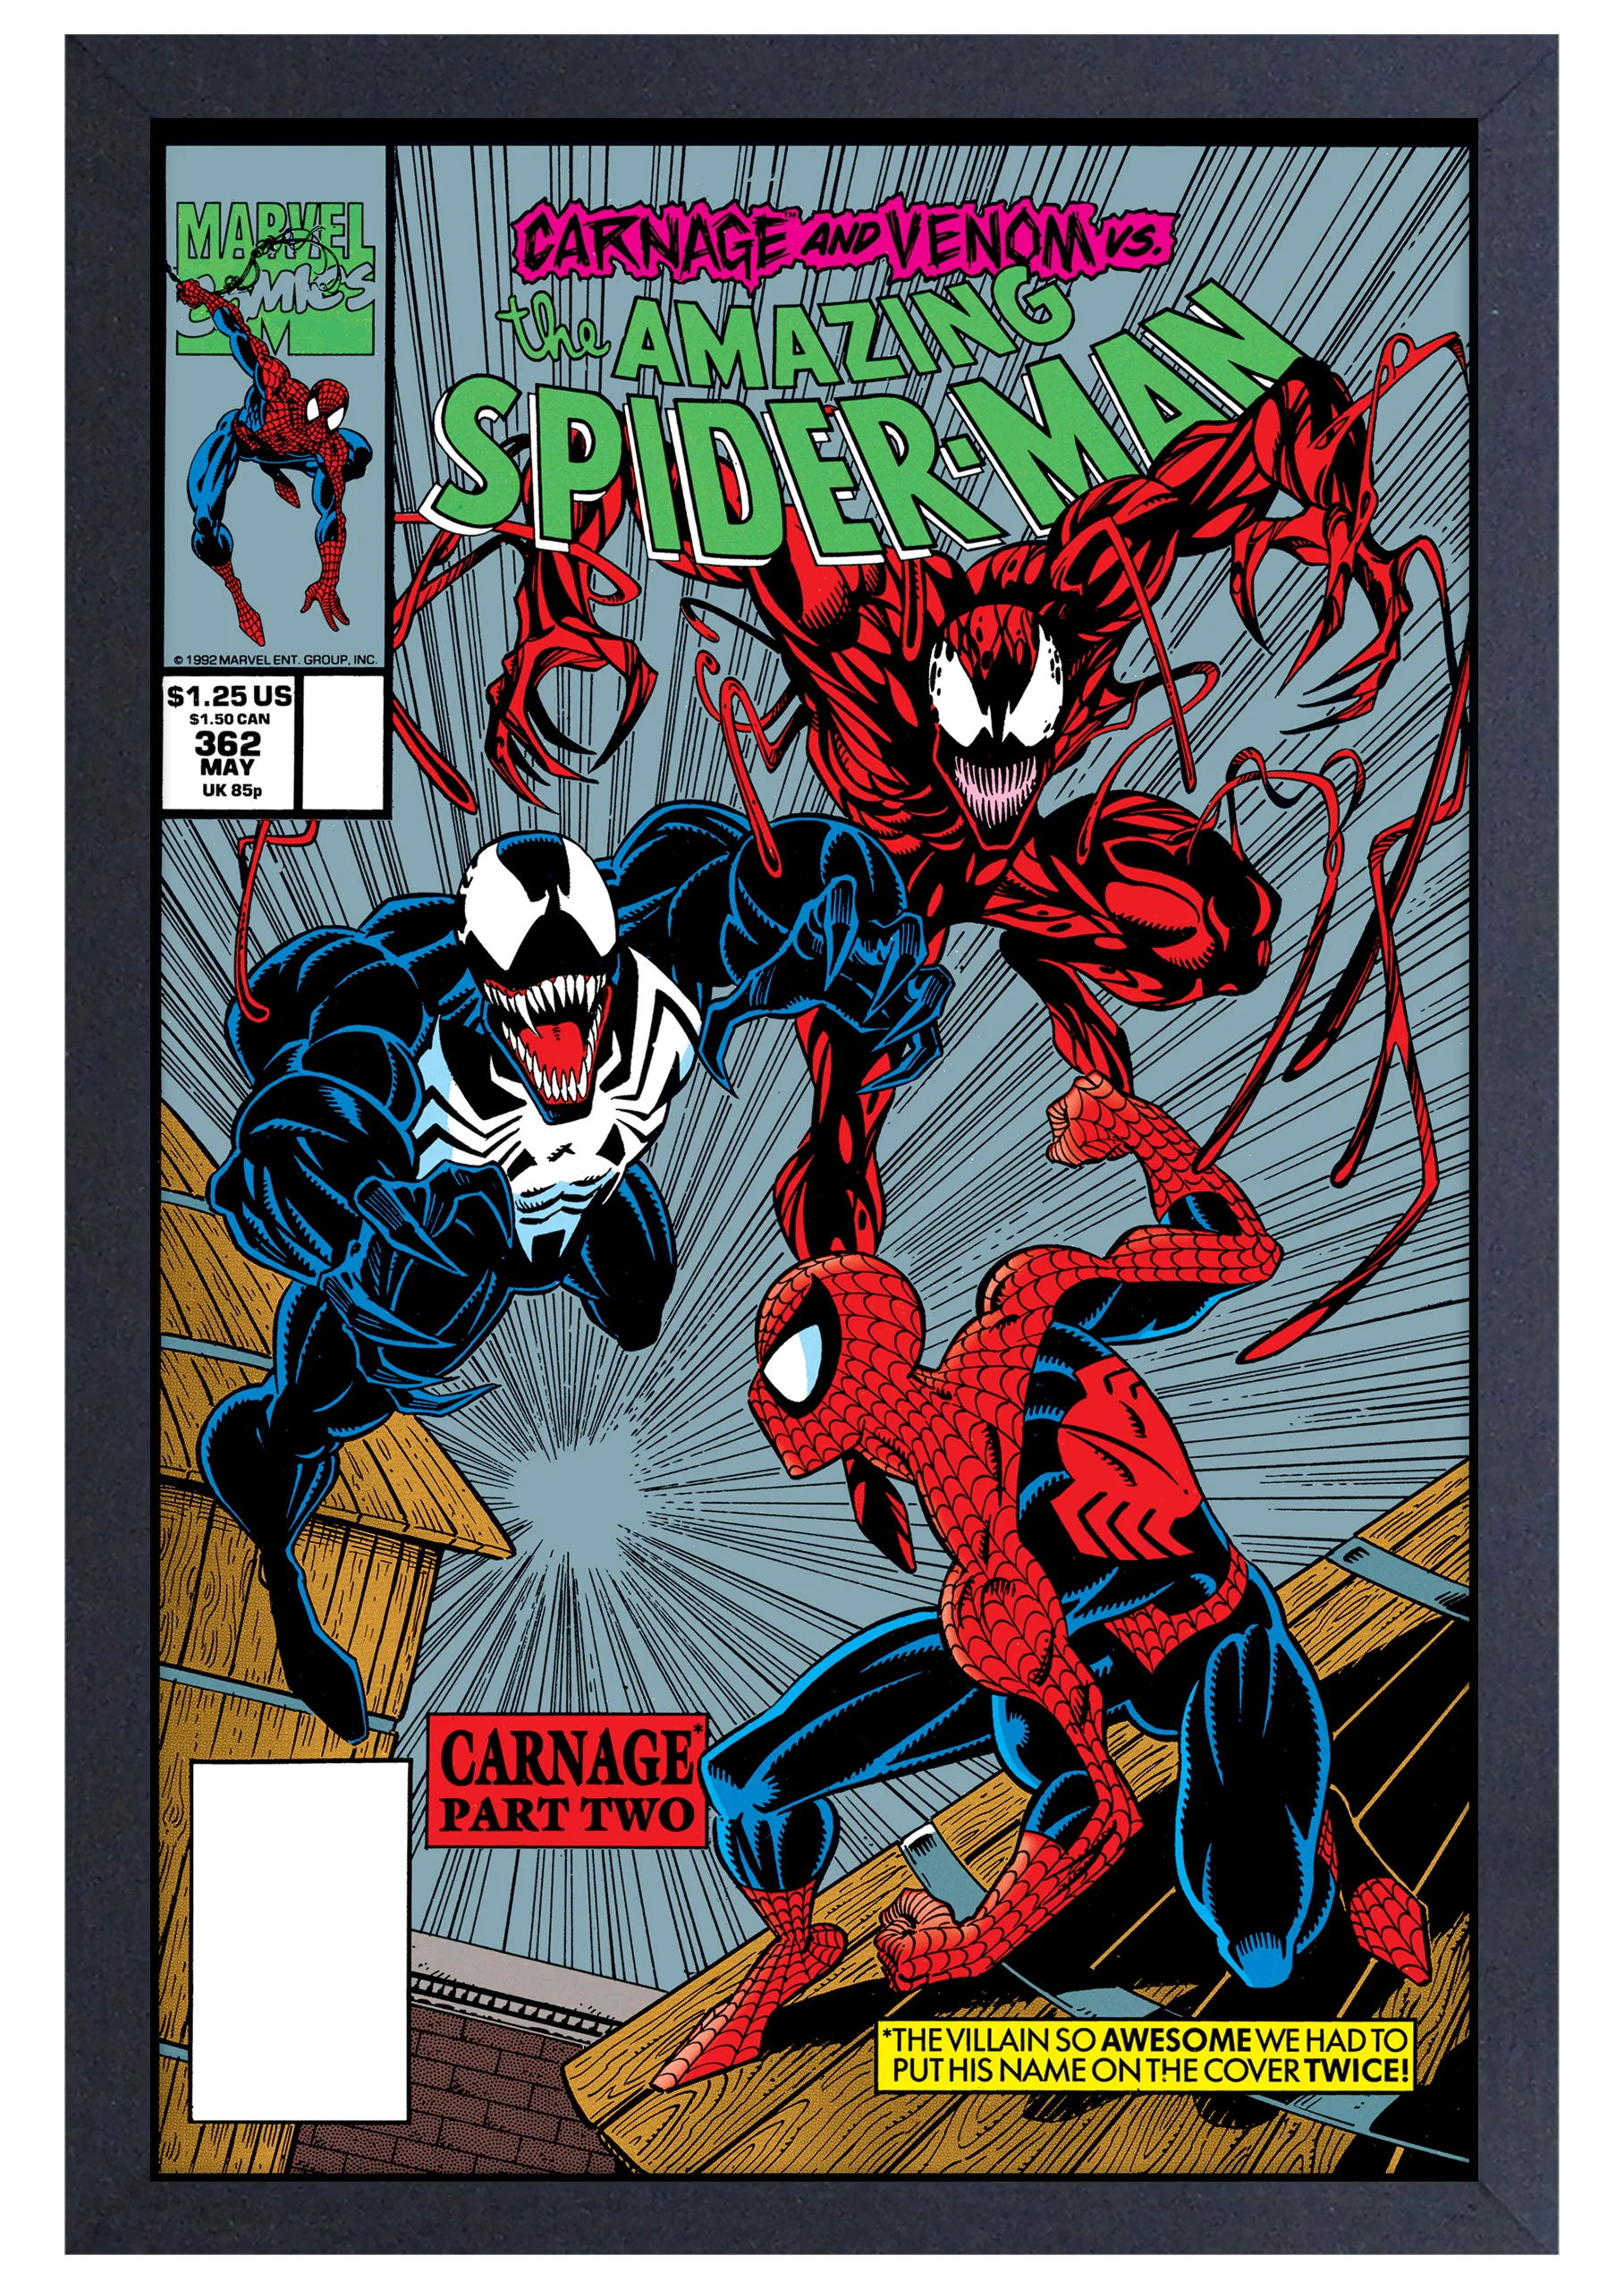 Marvel - Spiderman - Venom & Carnage Comic (11"x17" Gel-Coat) (Order in multiples of 6, mix and match styles)